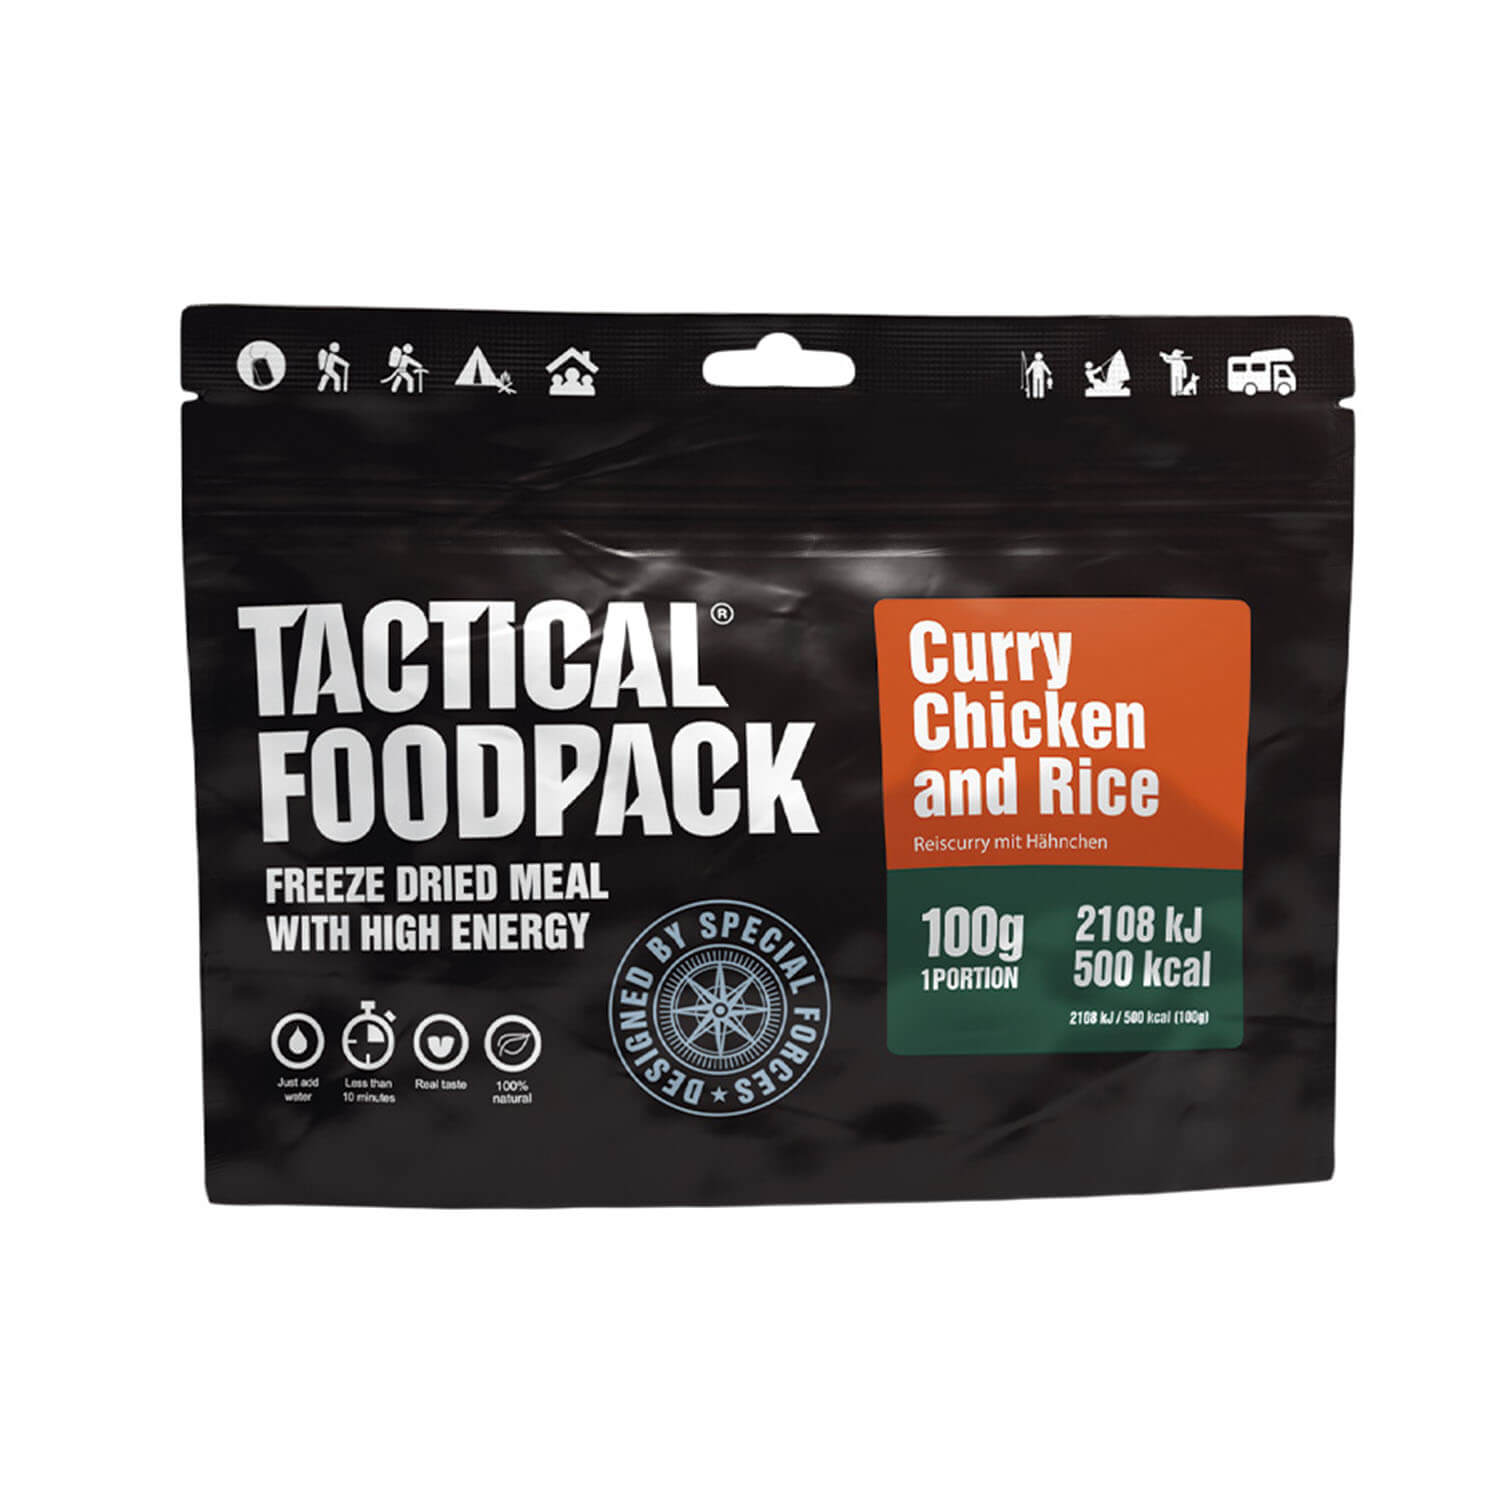 Tactical Foodpack Curry Chicken and Rice - Outdoor Kitchen